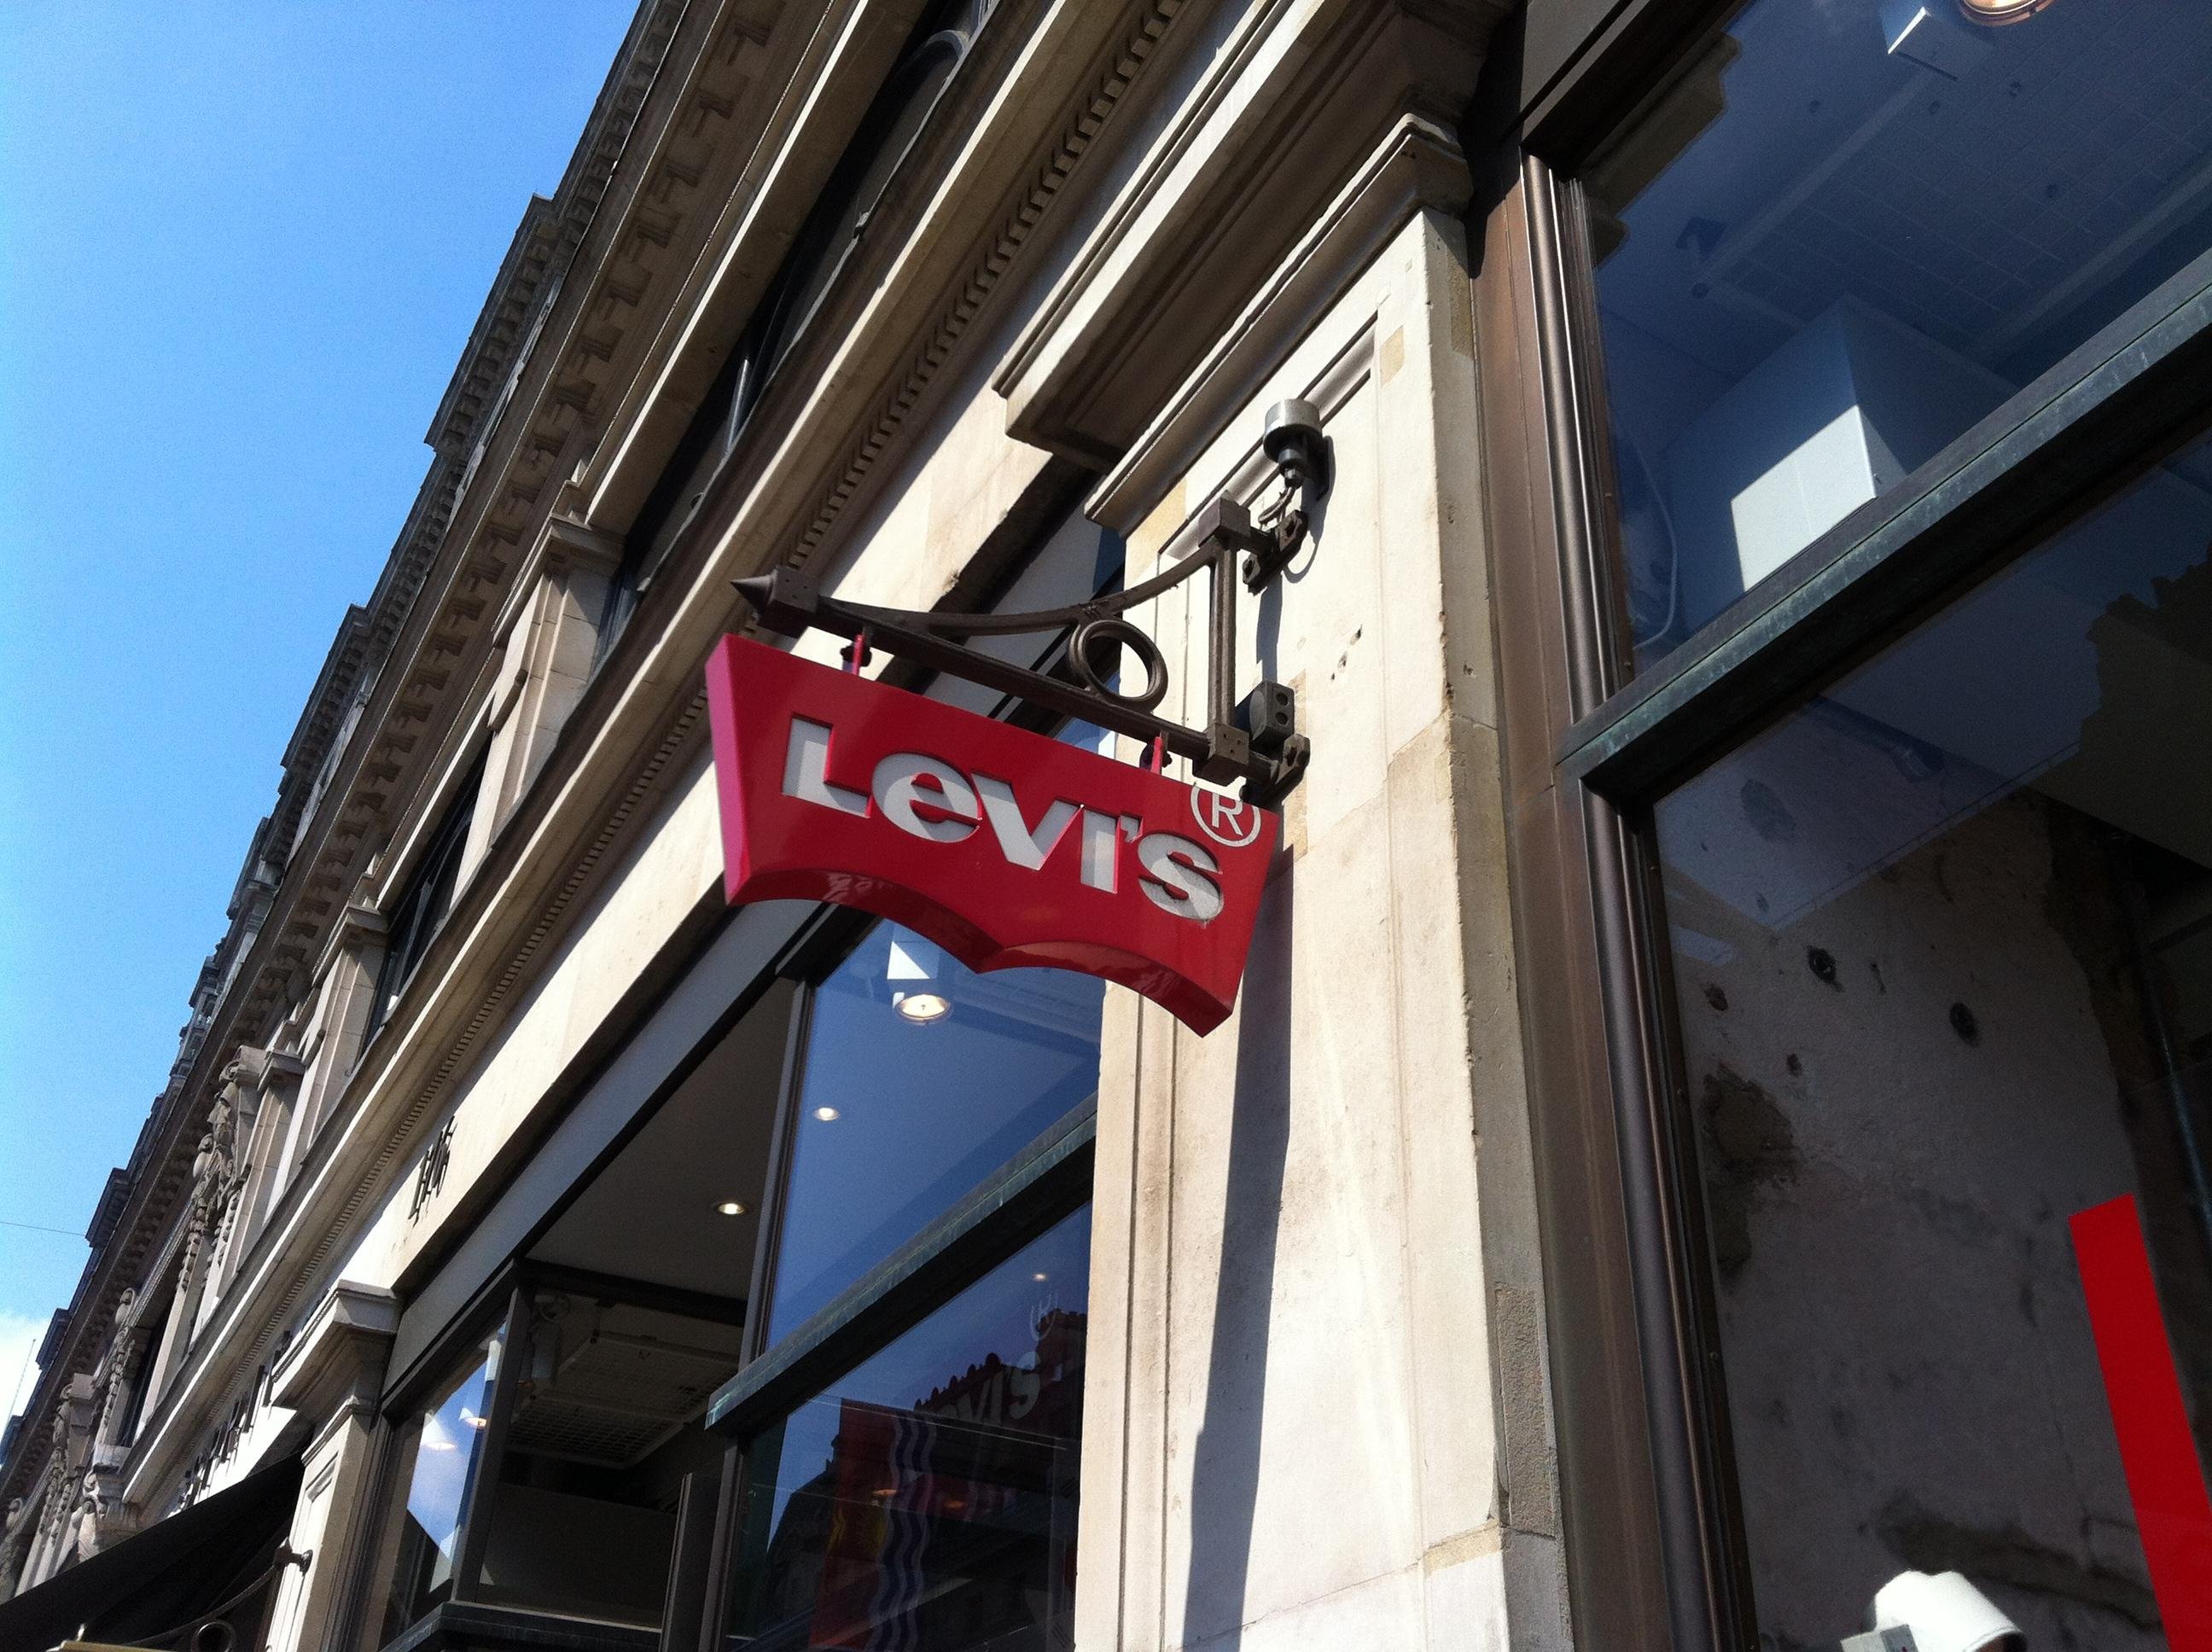 levis store oxford street